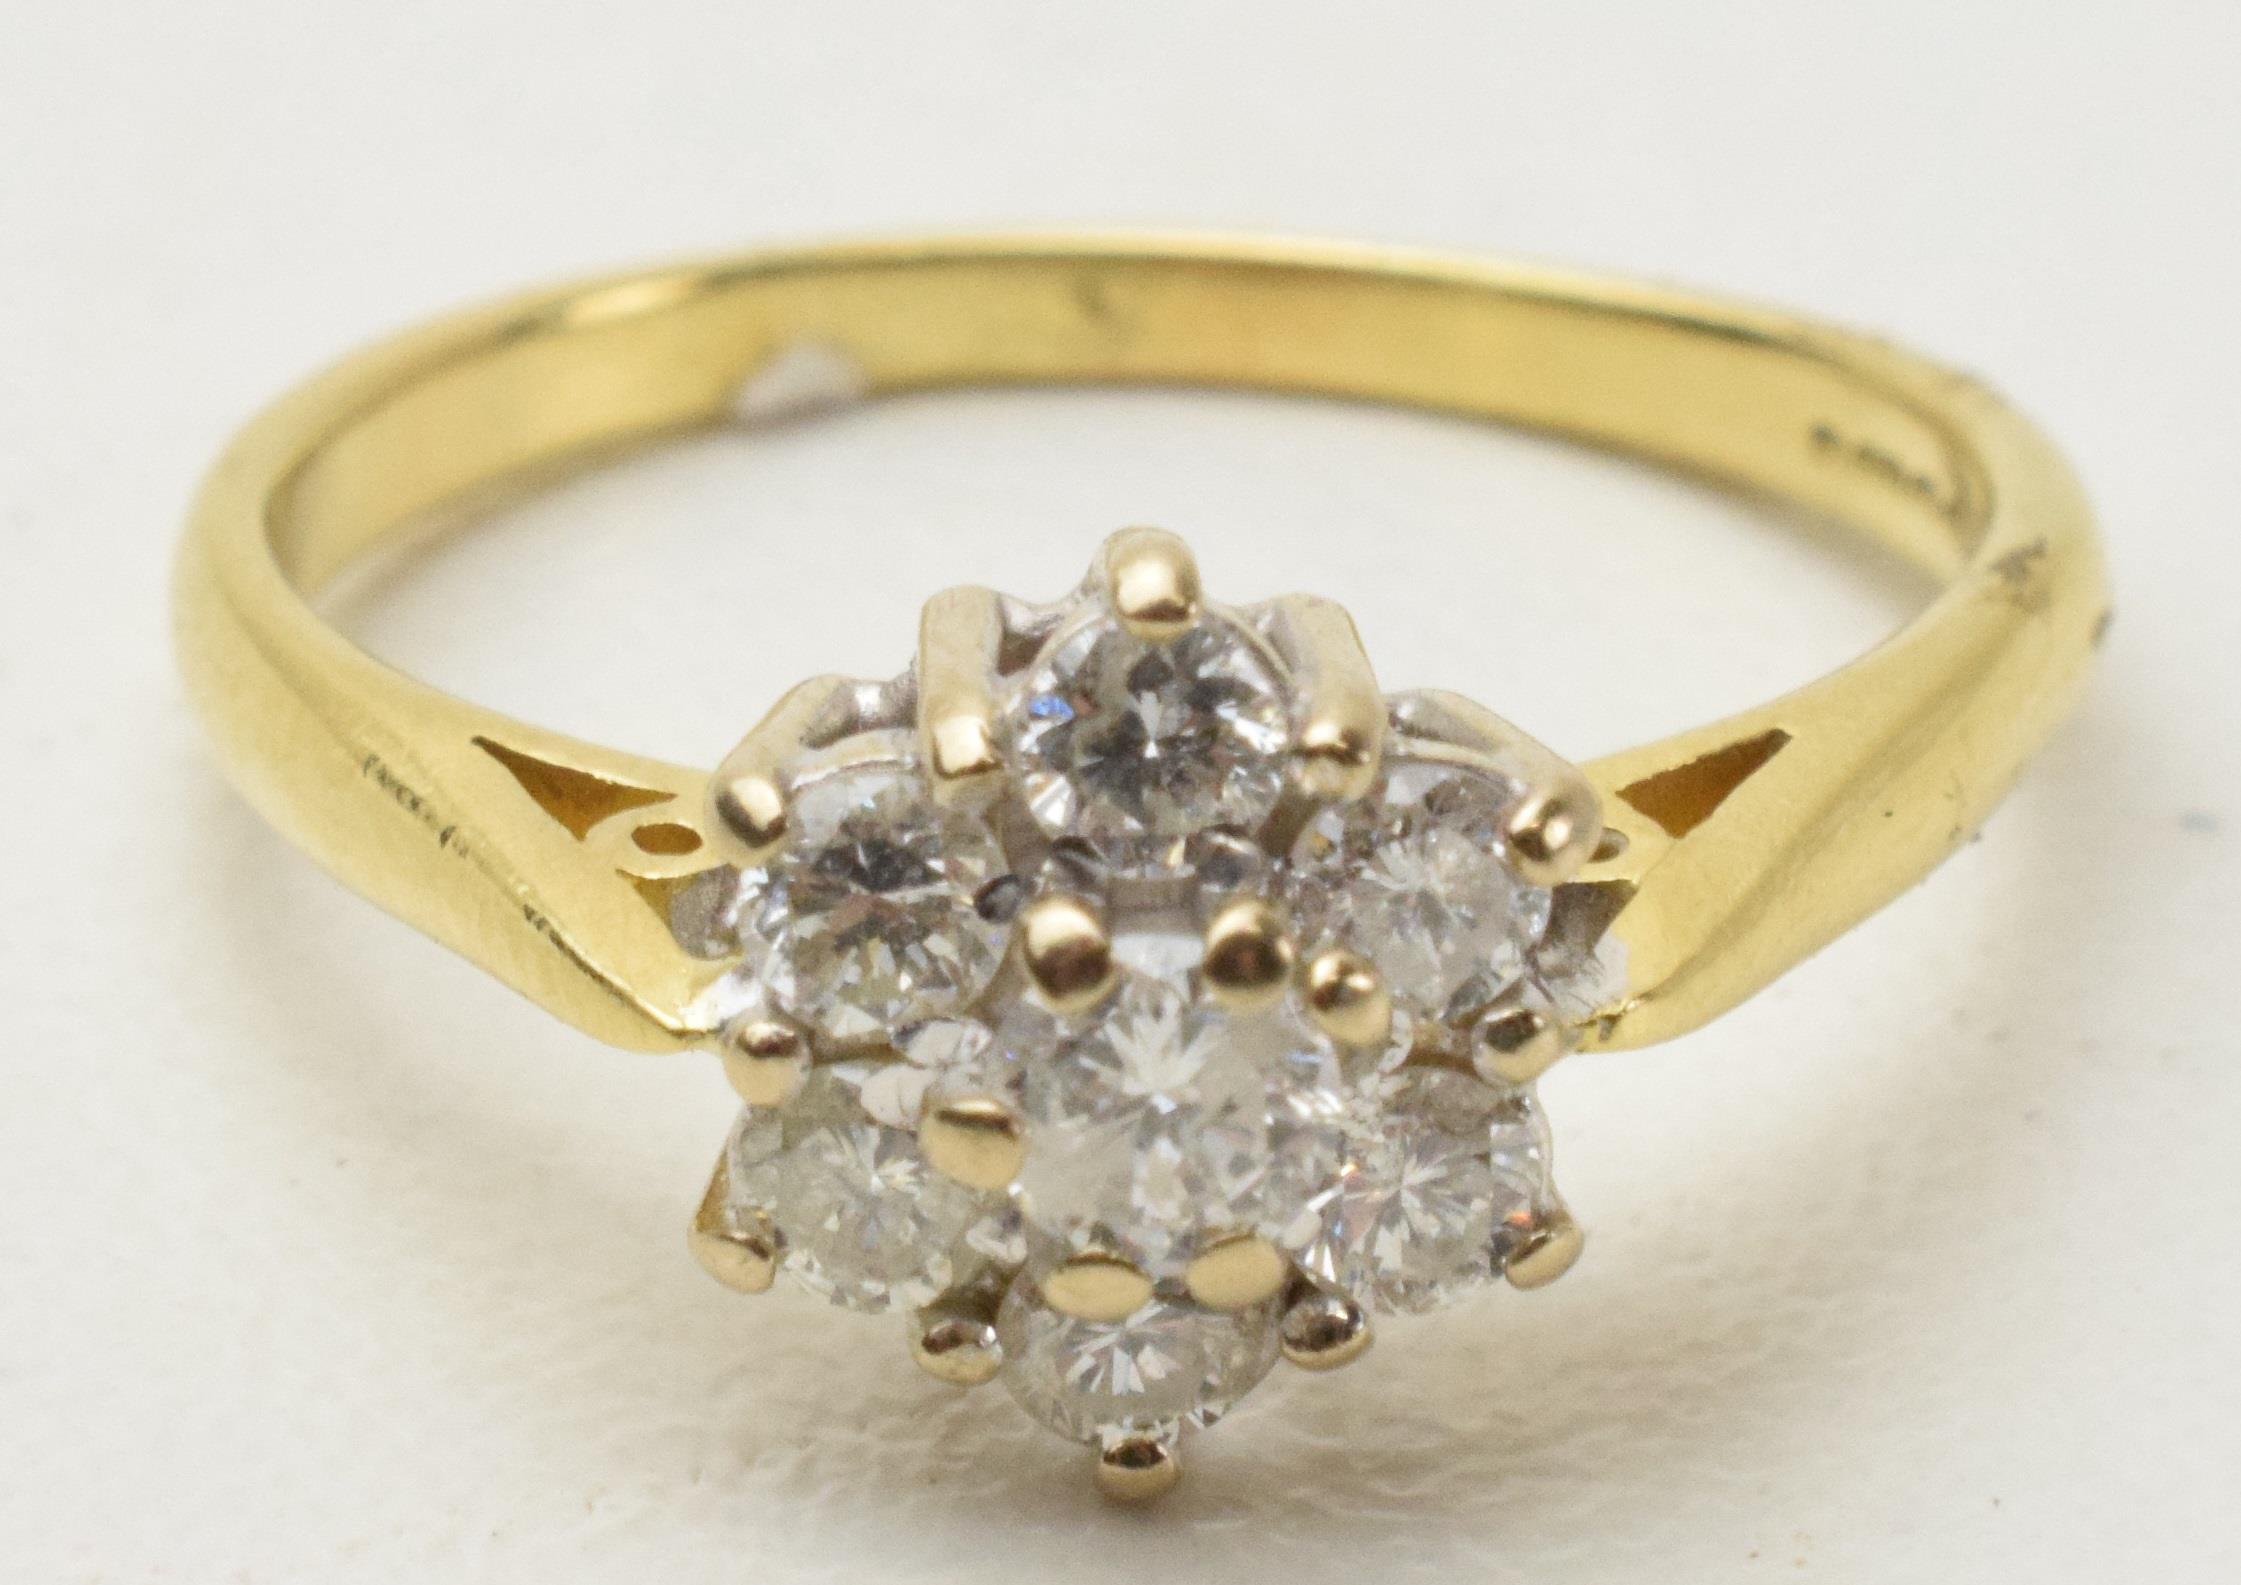 18ct gold diamond ring, 3.1 grams, size O, with approx. 0.4 of diamond.